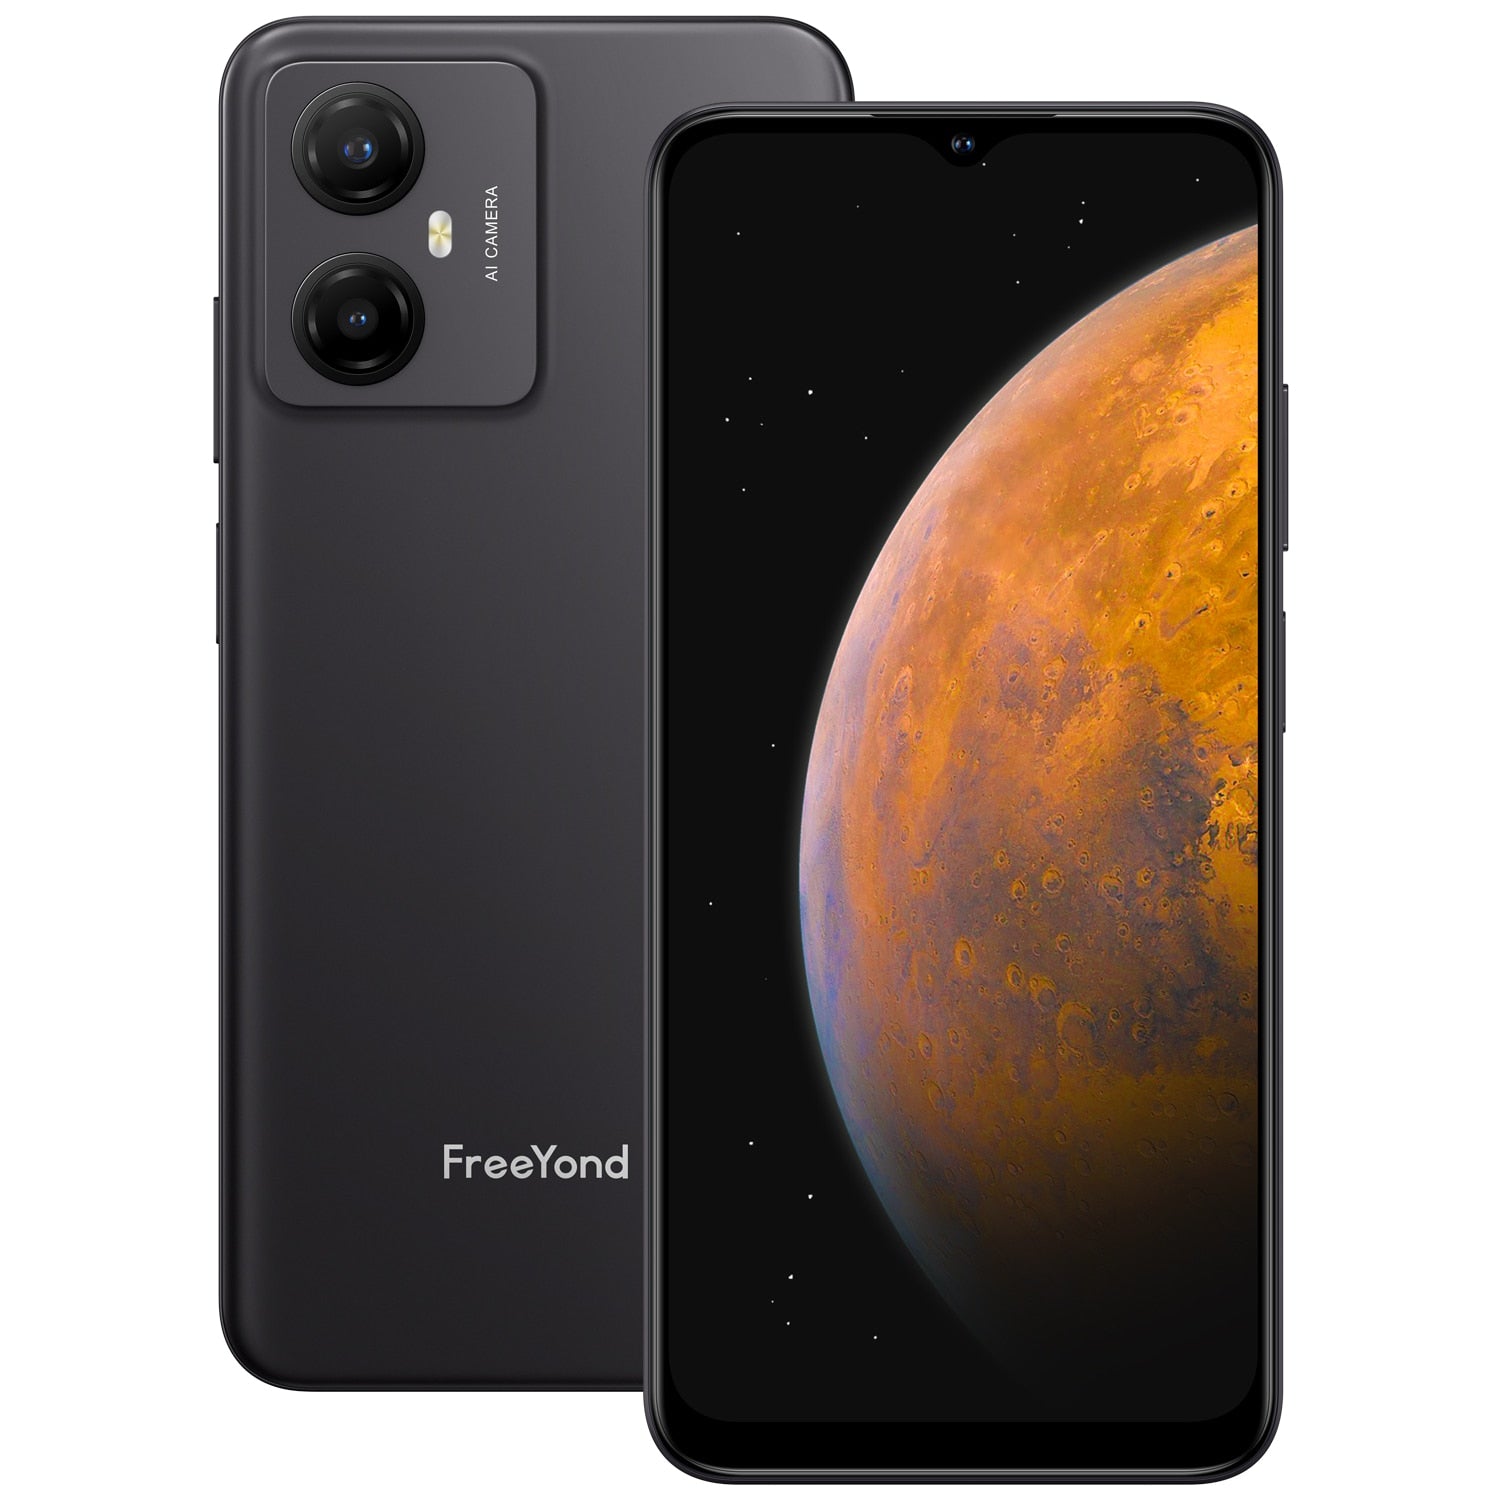 Global Version FreeYond F9 Smartphone 128GB/64GB 6.52&quot; HD+ Screen Octa Core 13MP Dual Camera 5000mAh Android Mobile Phone